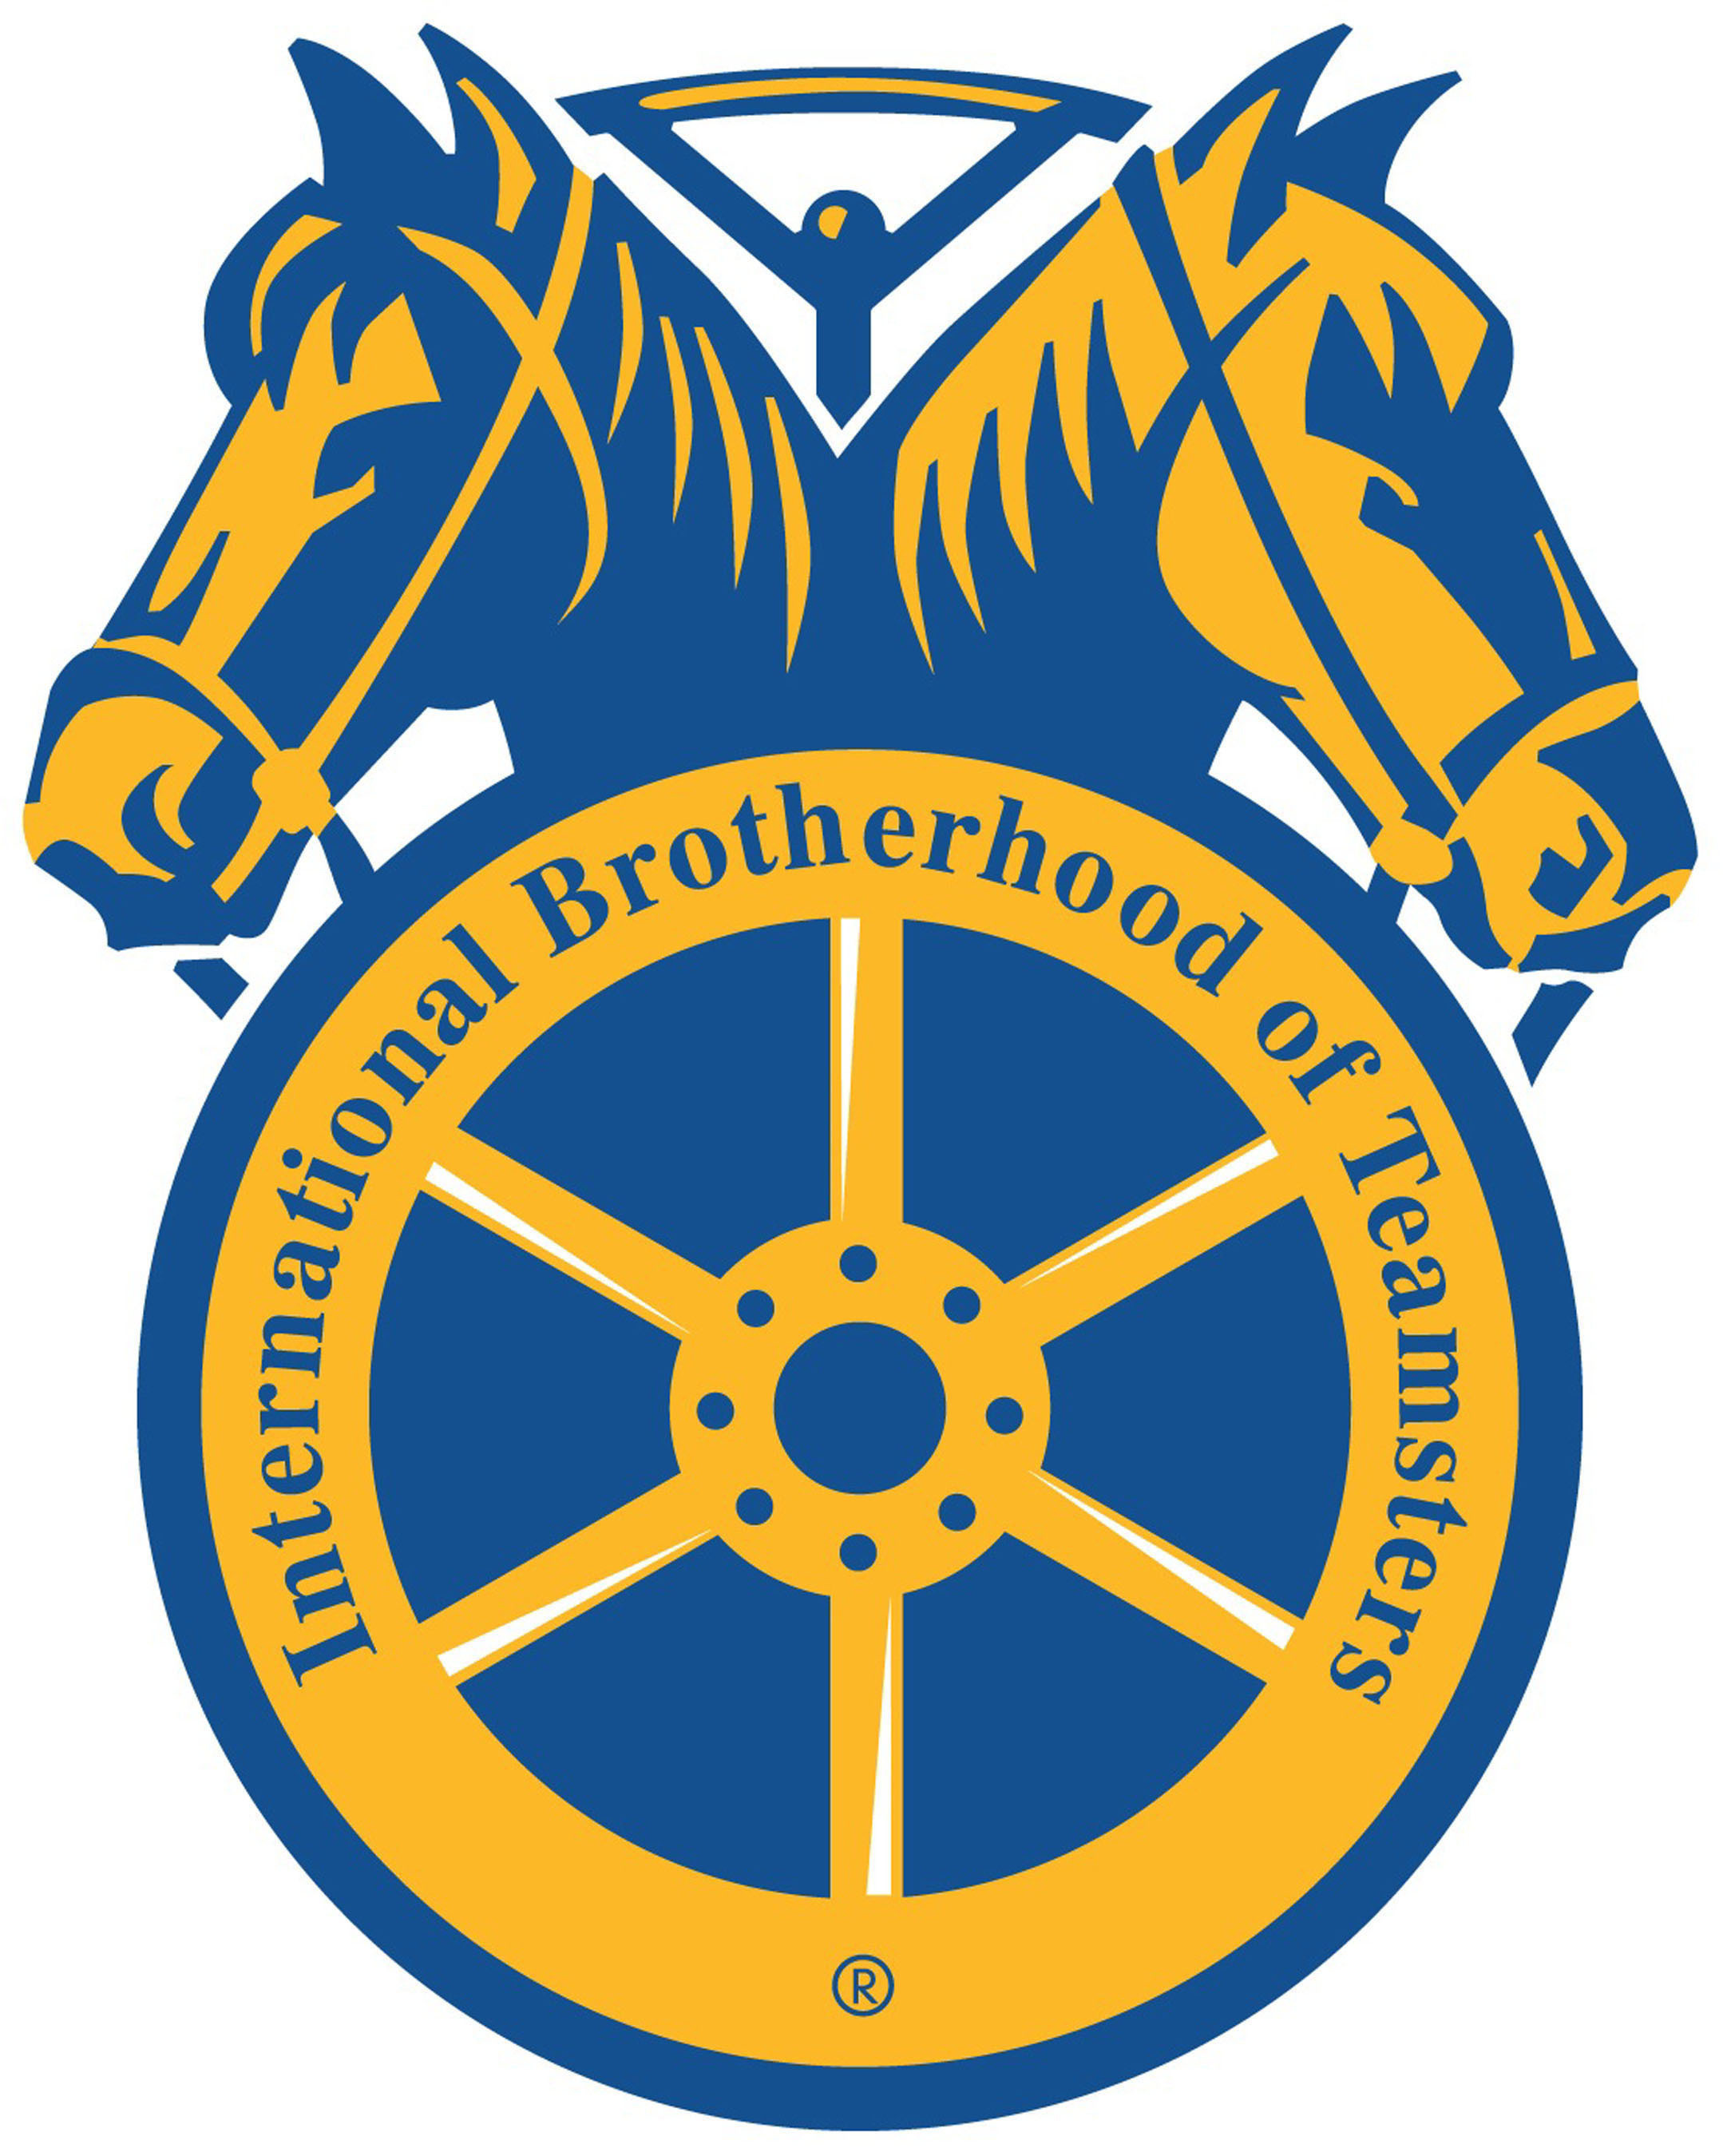 FRIDAY, 10/13 TEAMSTERS AT DETROIT MEDICAL CENTER TO RALLY FOR FAIR